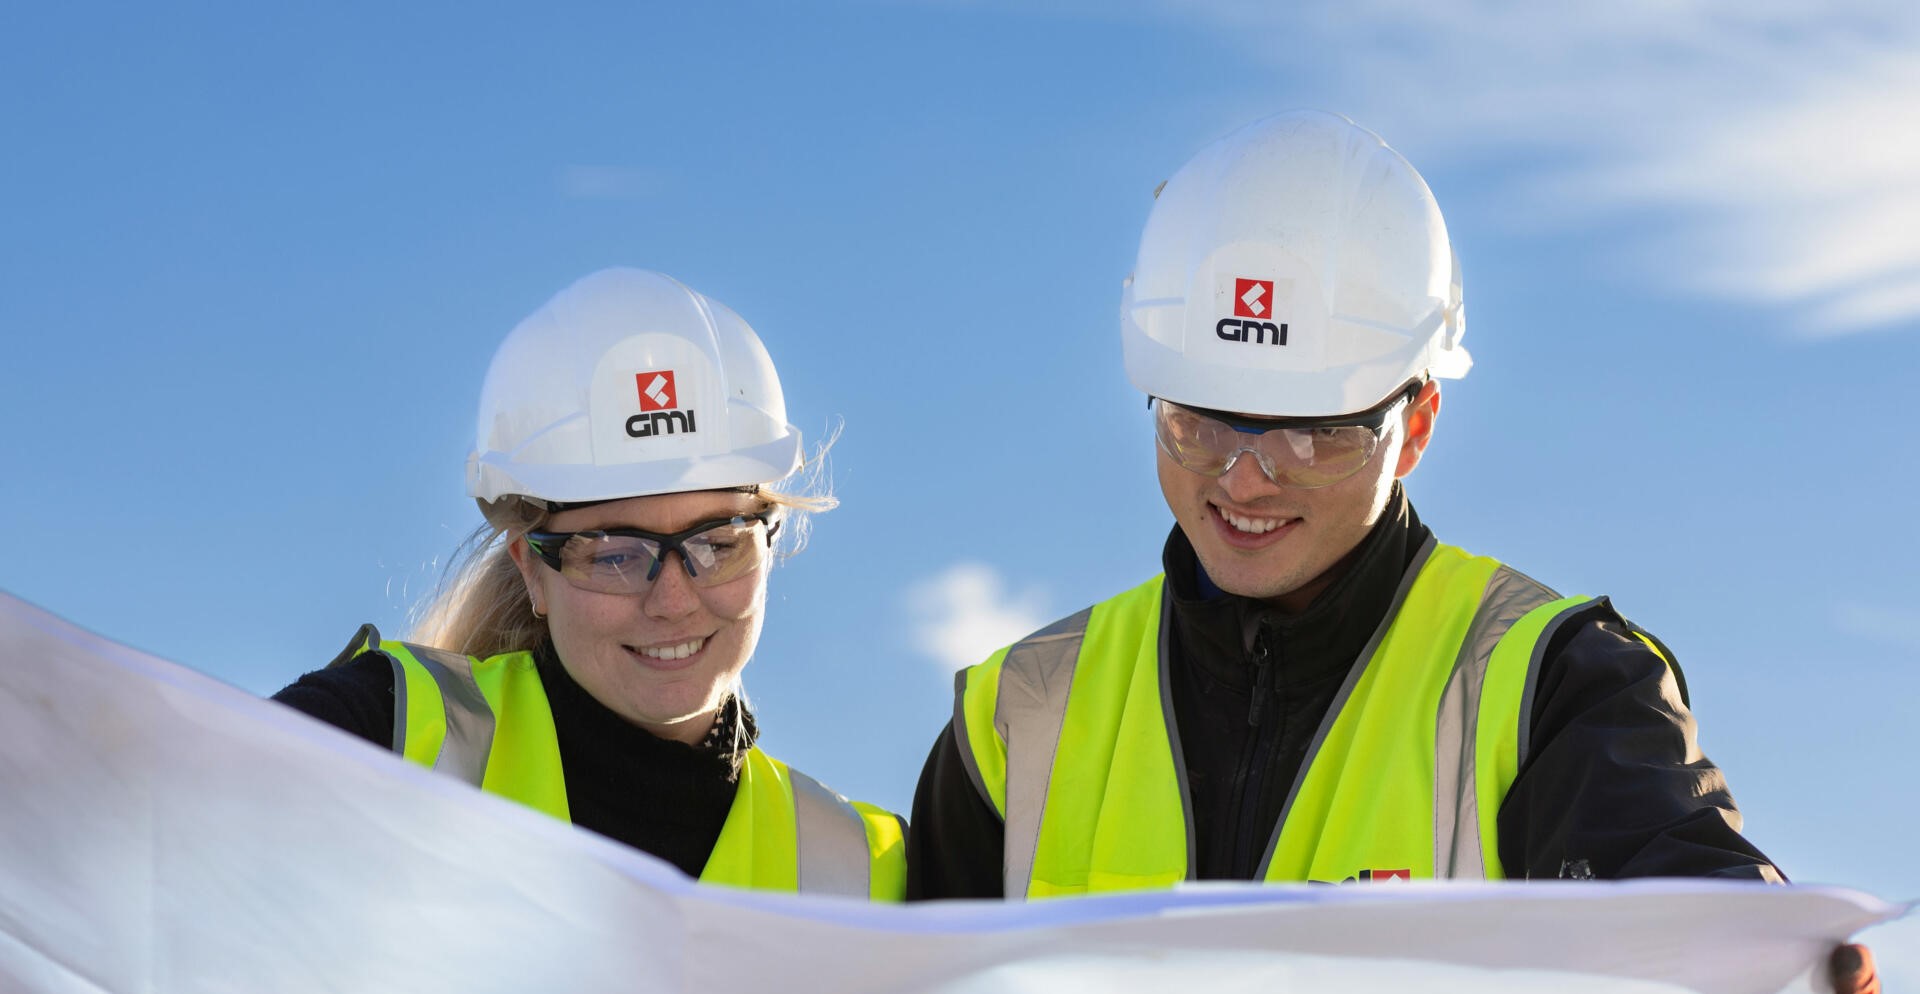 GMI Construction | Man and woman in hard-hats